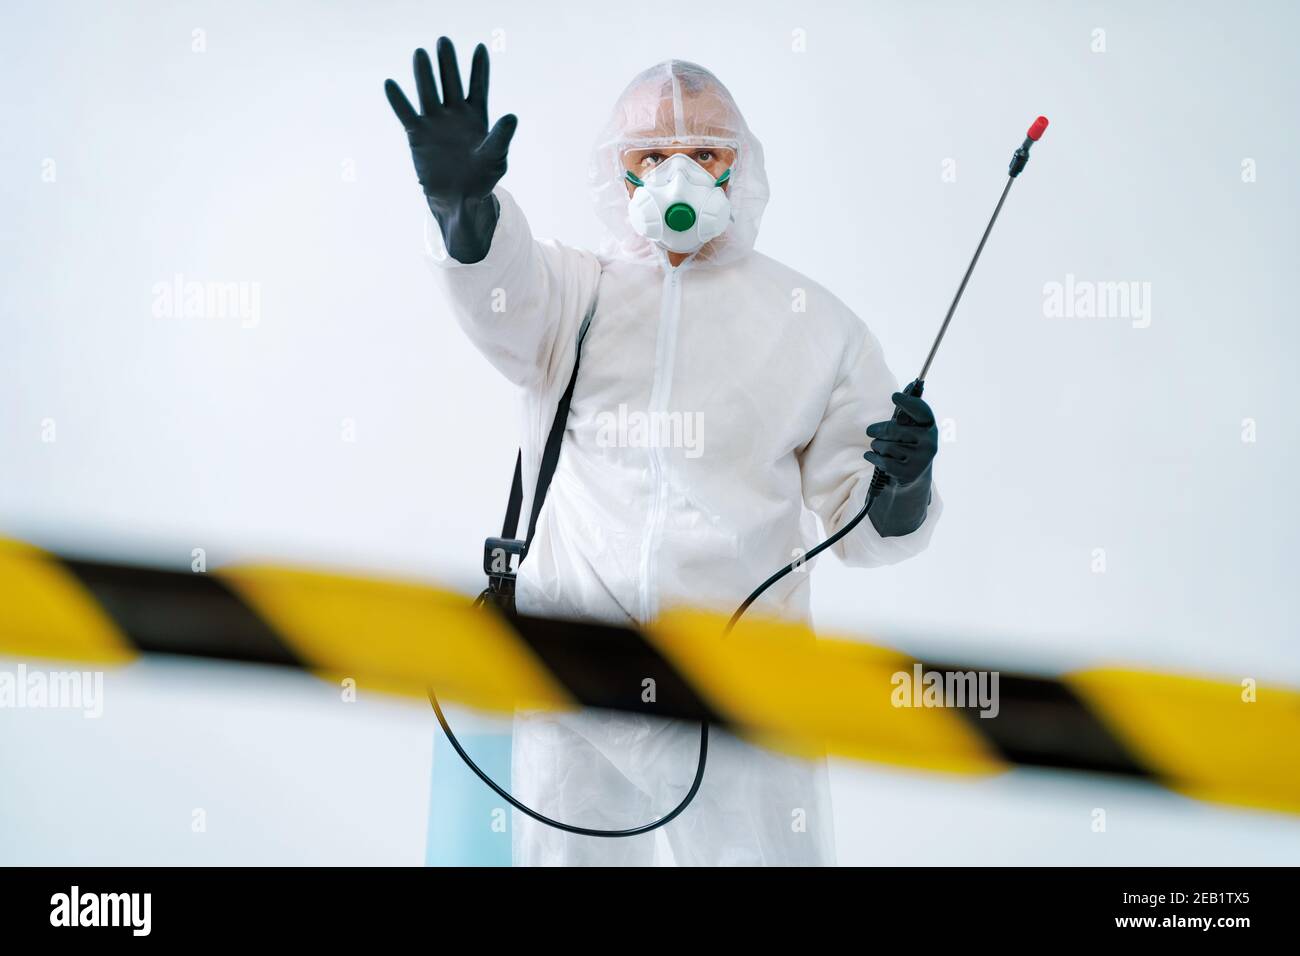 Disinfectant worker in protective suit showing stop gesture, to control an outbreak of virus Stock Photo